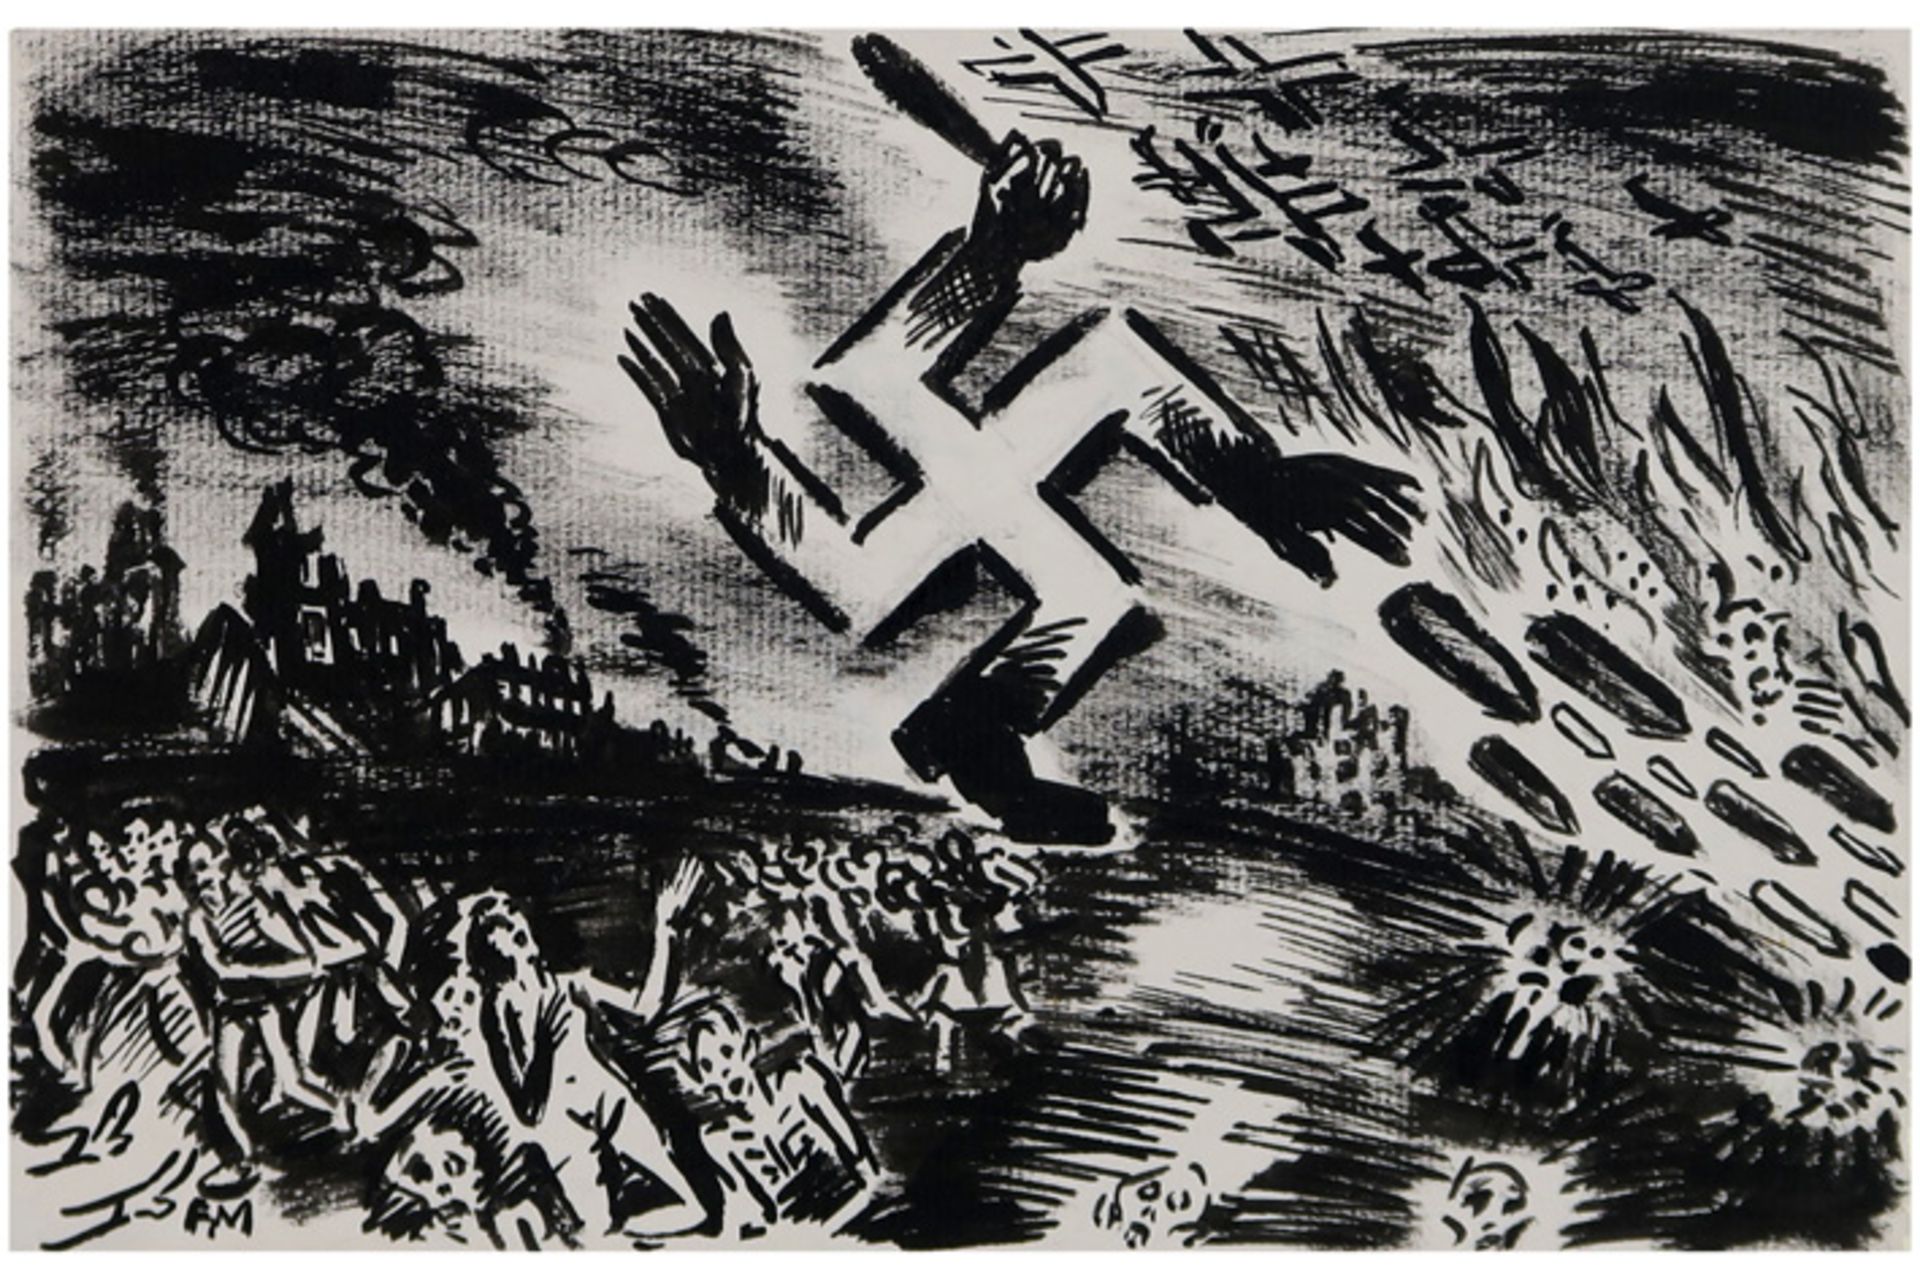 quite special Frans Masereel's "The occupier seen through his eyes" ink drawing to be dated 1940/